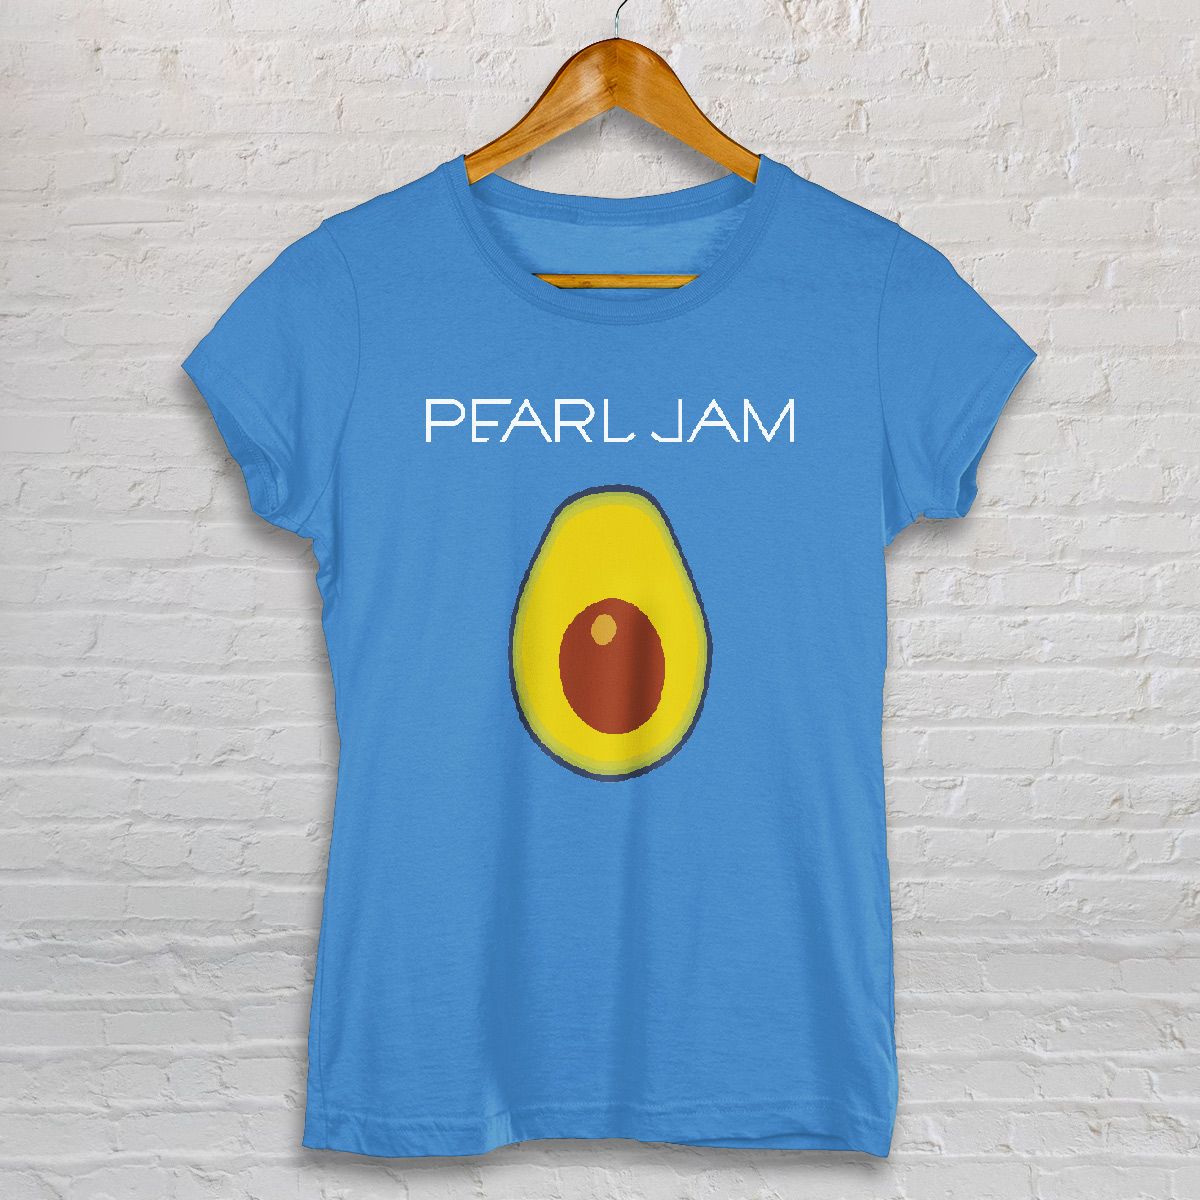 Nome do produto: BABY LOOK - PEARL JAM - 2006 - ABACATE